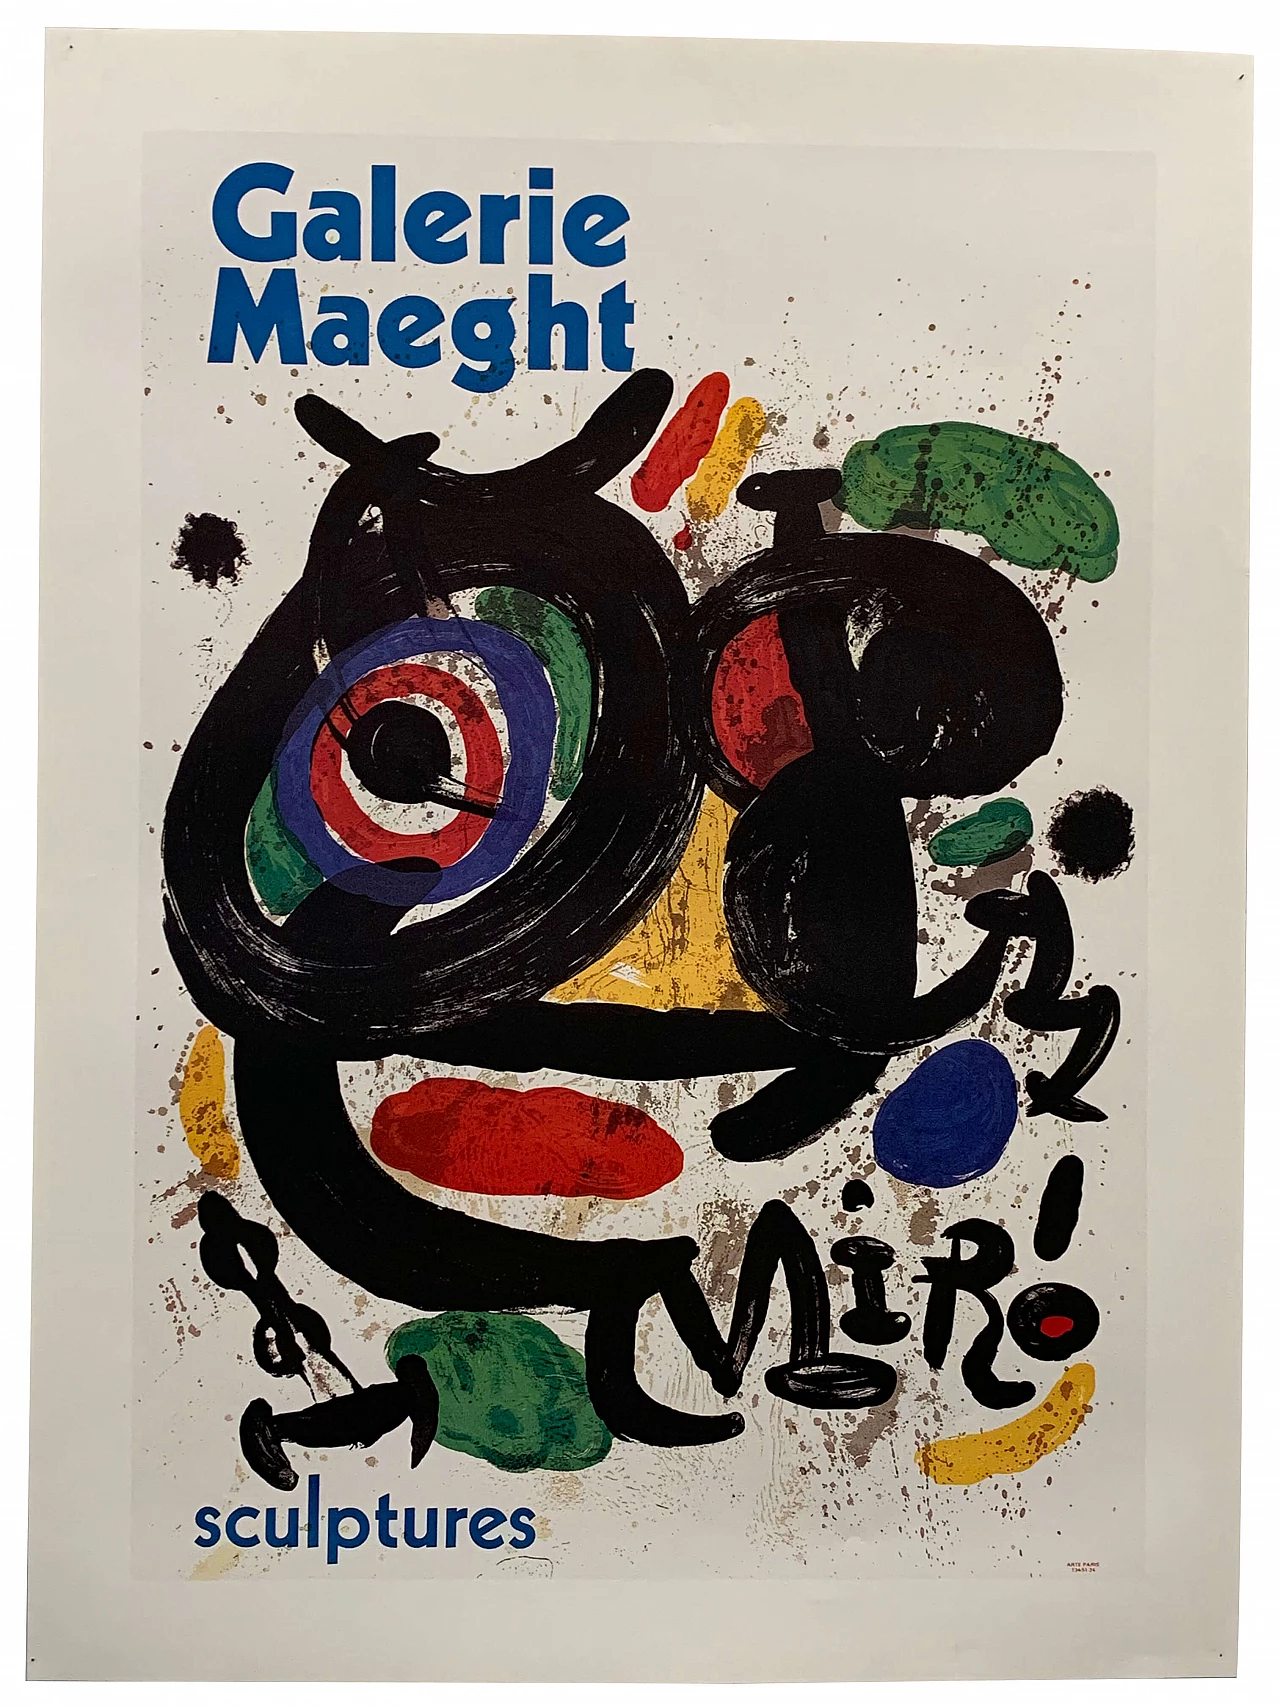 Exhibition panel for the Miró show at the Maeght Gallery in Paris, France, 70s 1112804